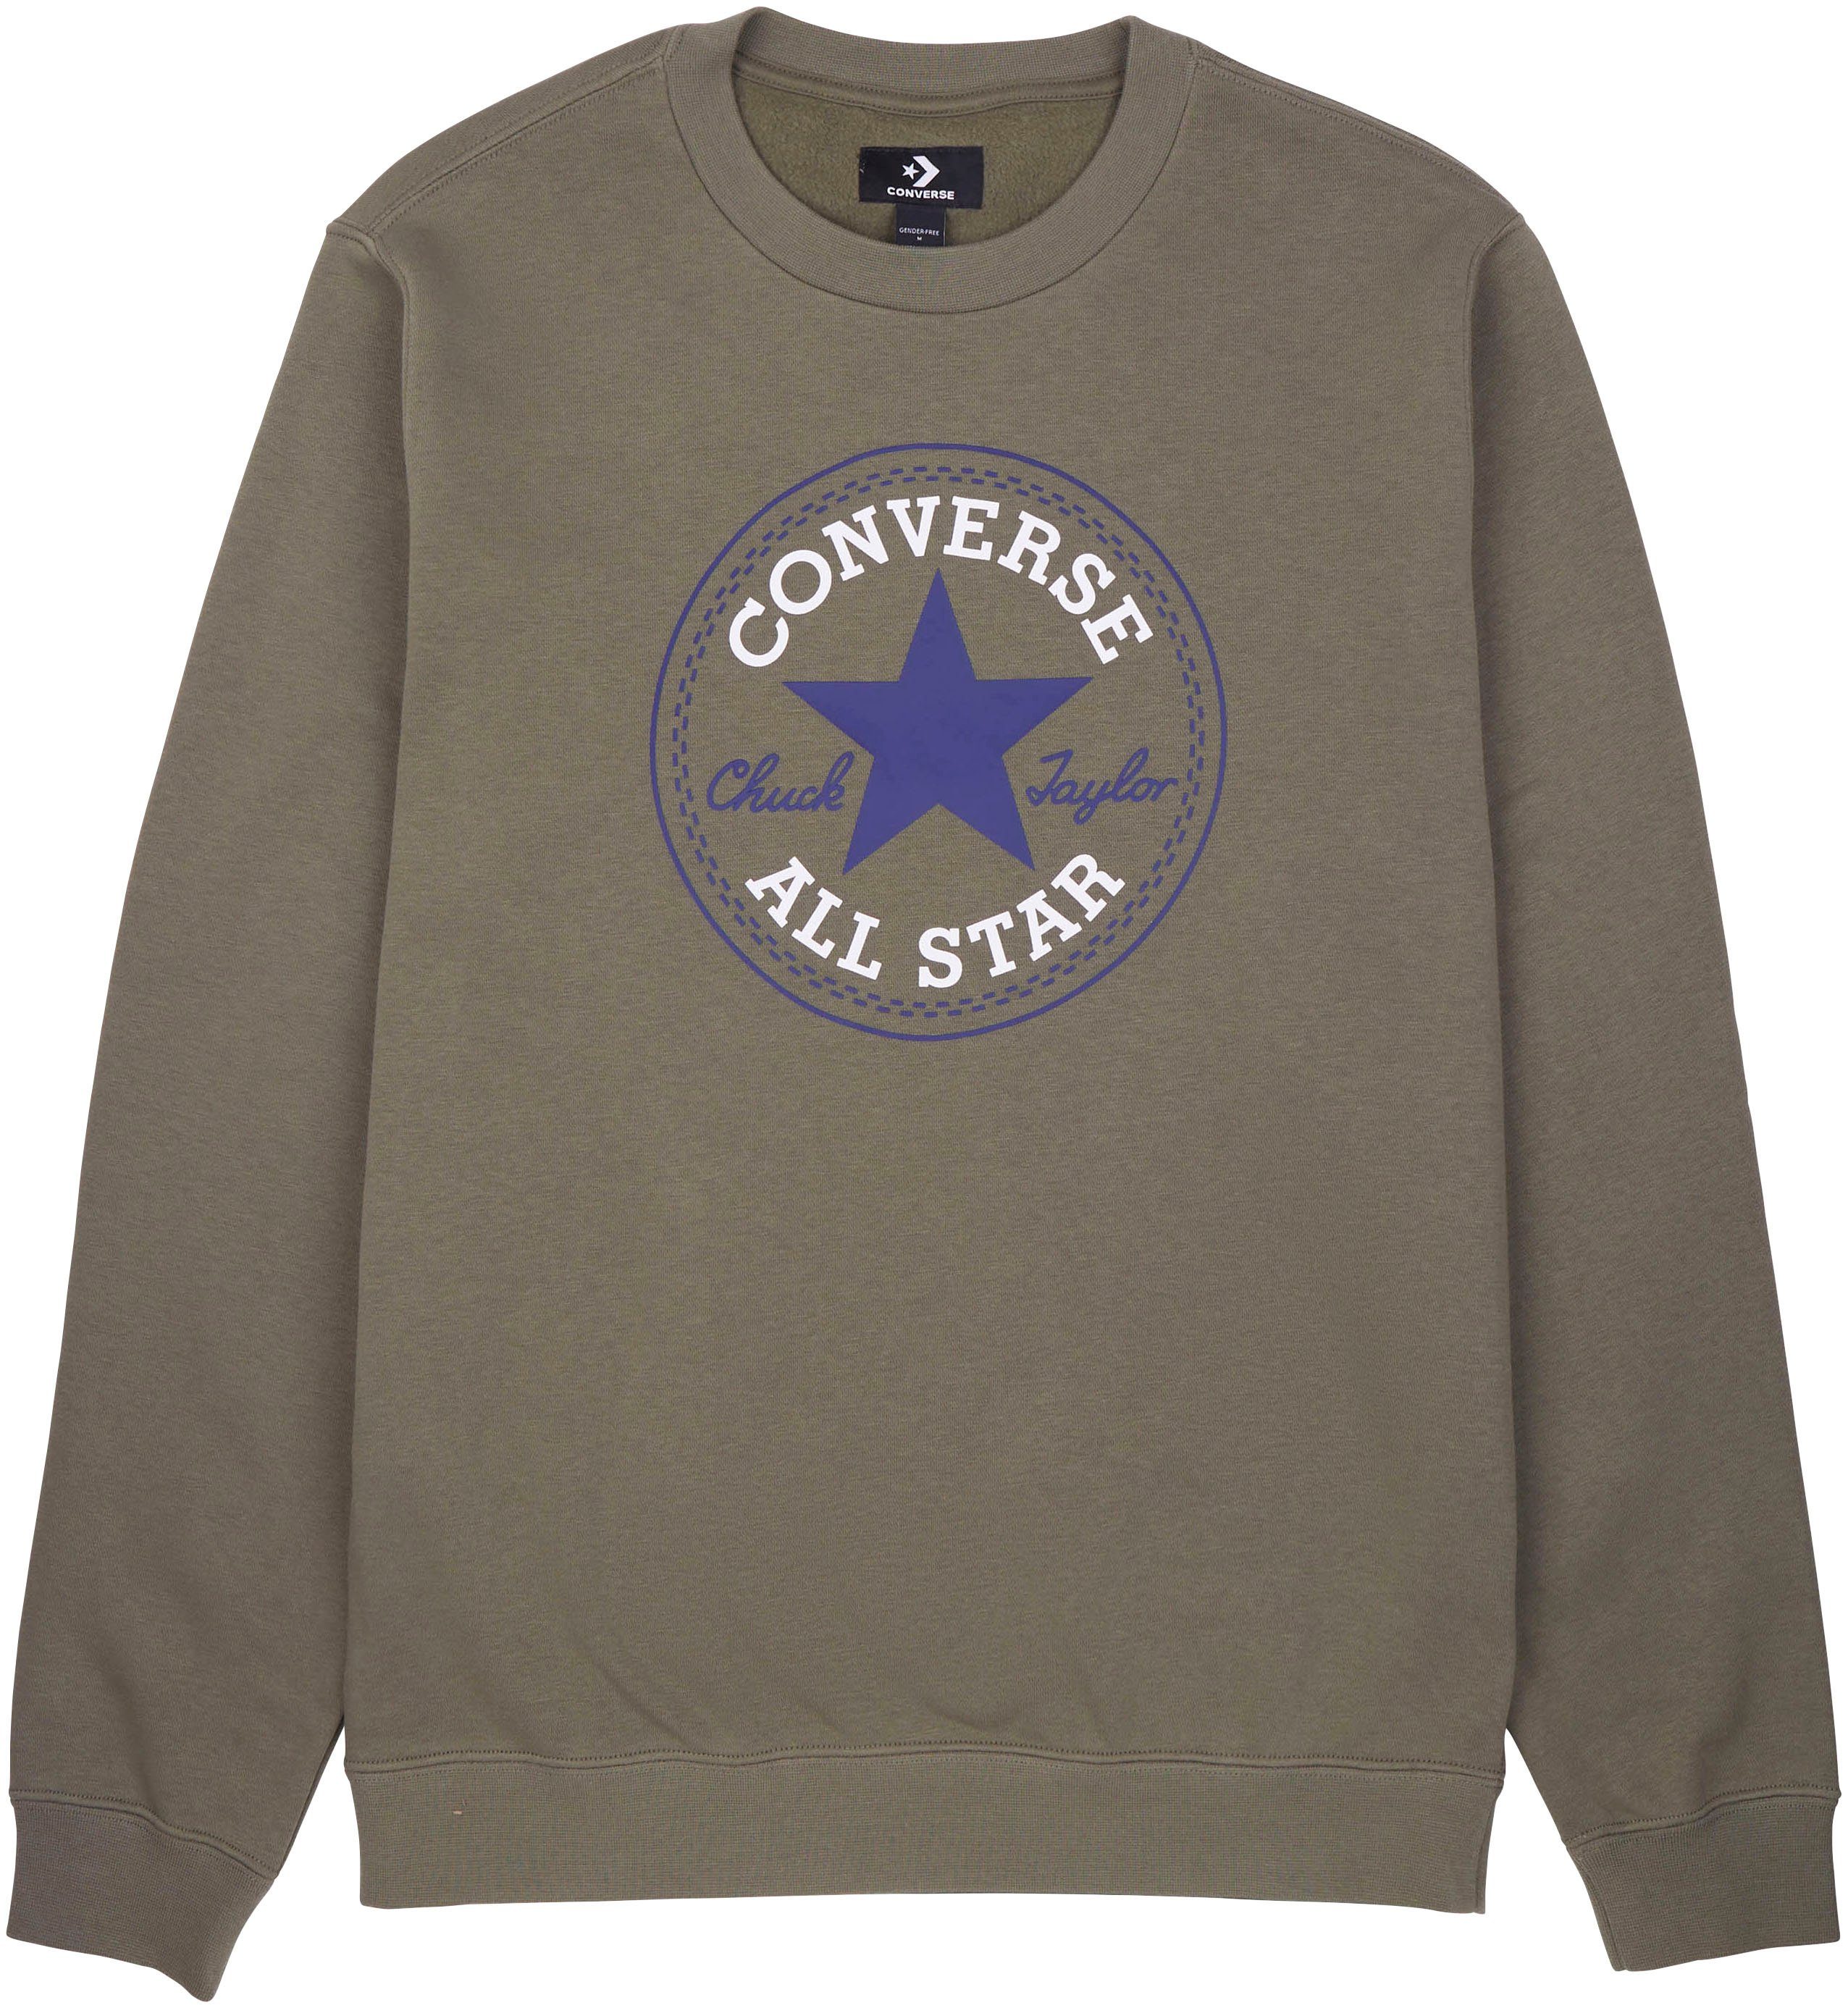 Converse Sweatshirt UNISEX ALL olive PATCH STAR BACK BRUSHED